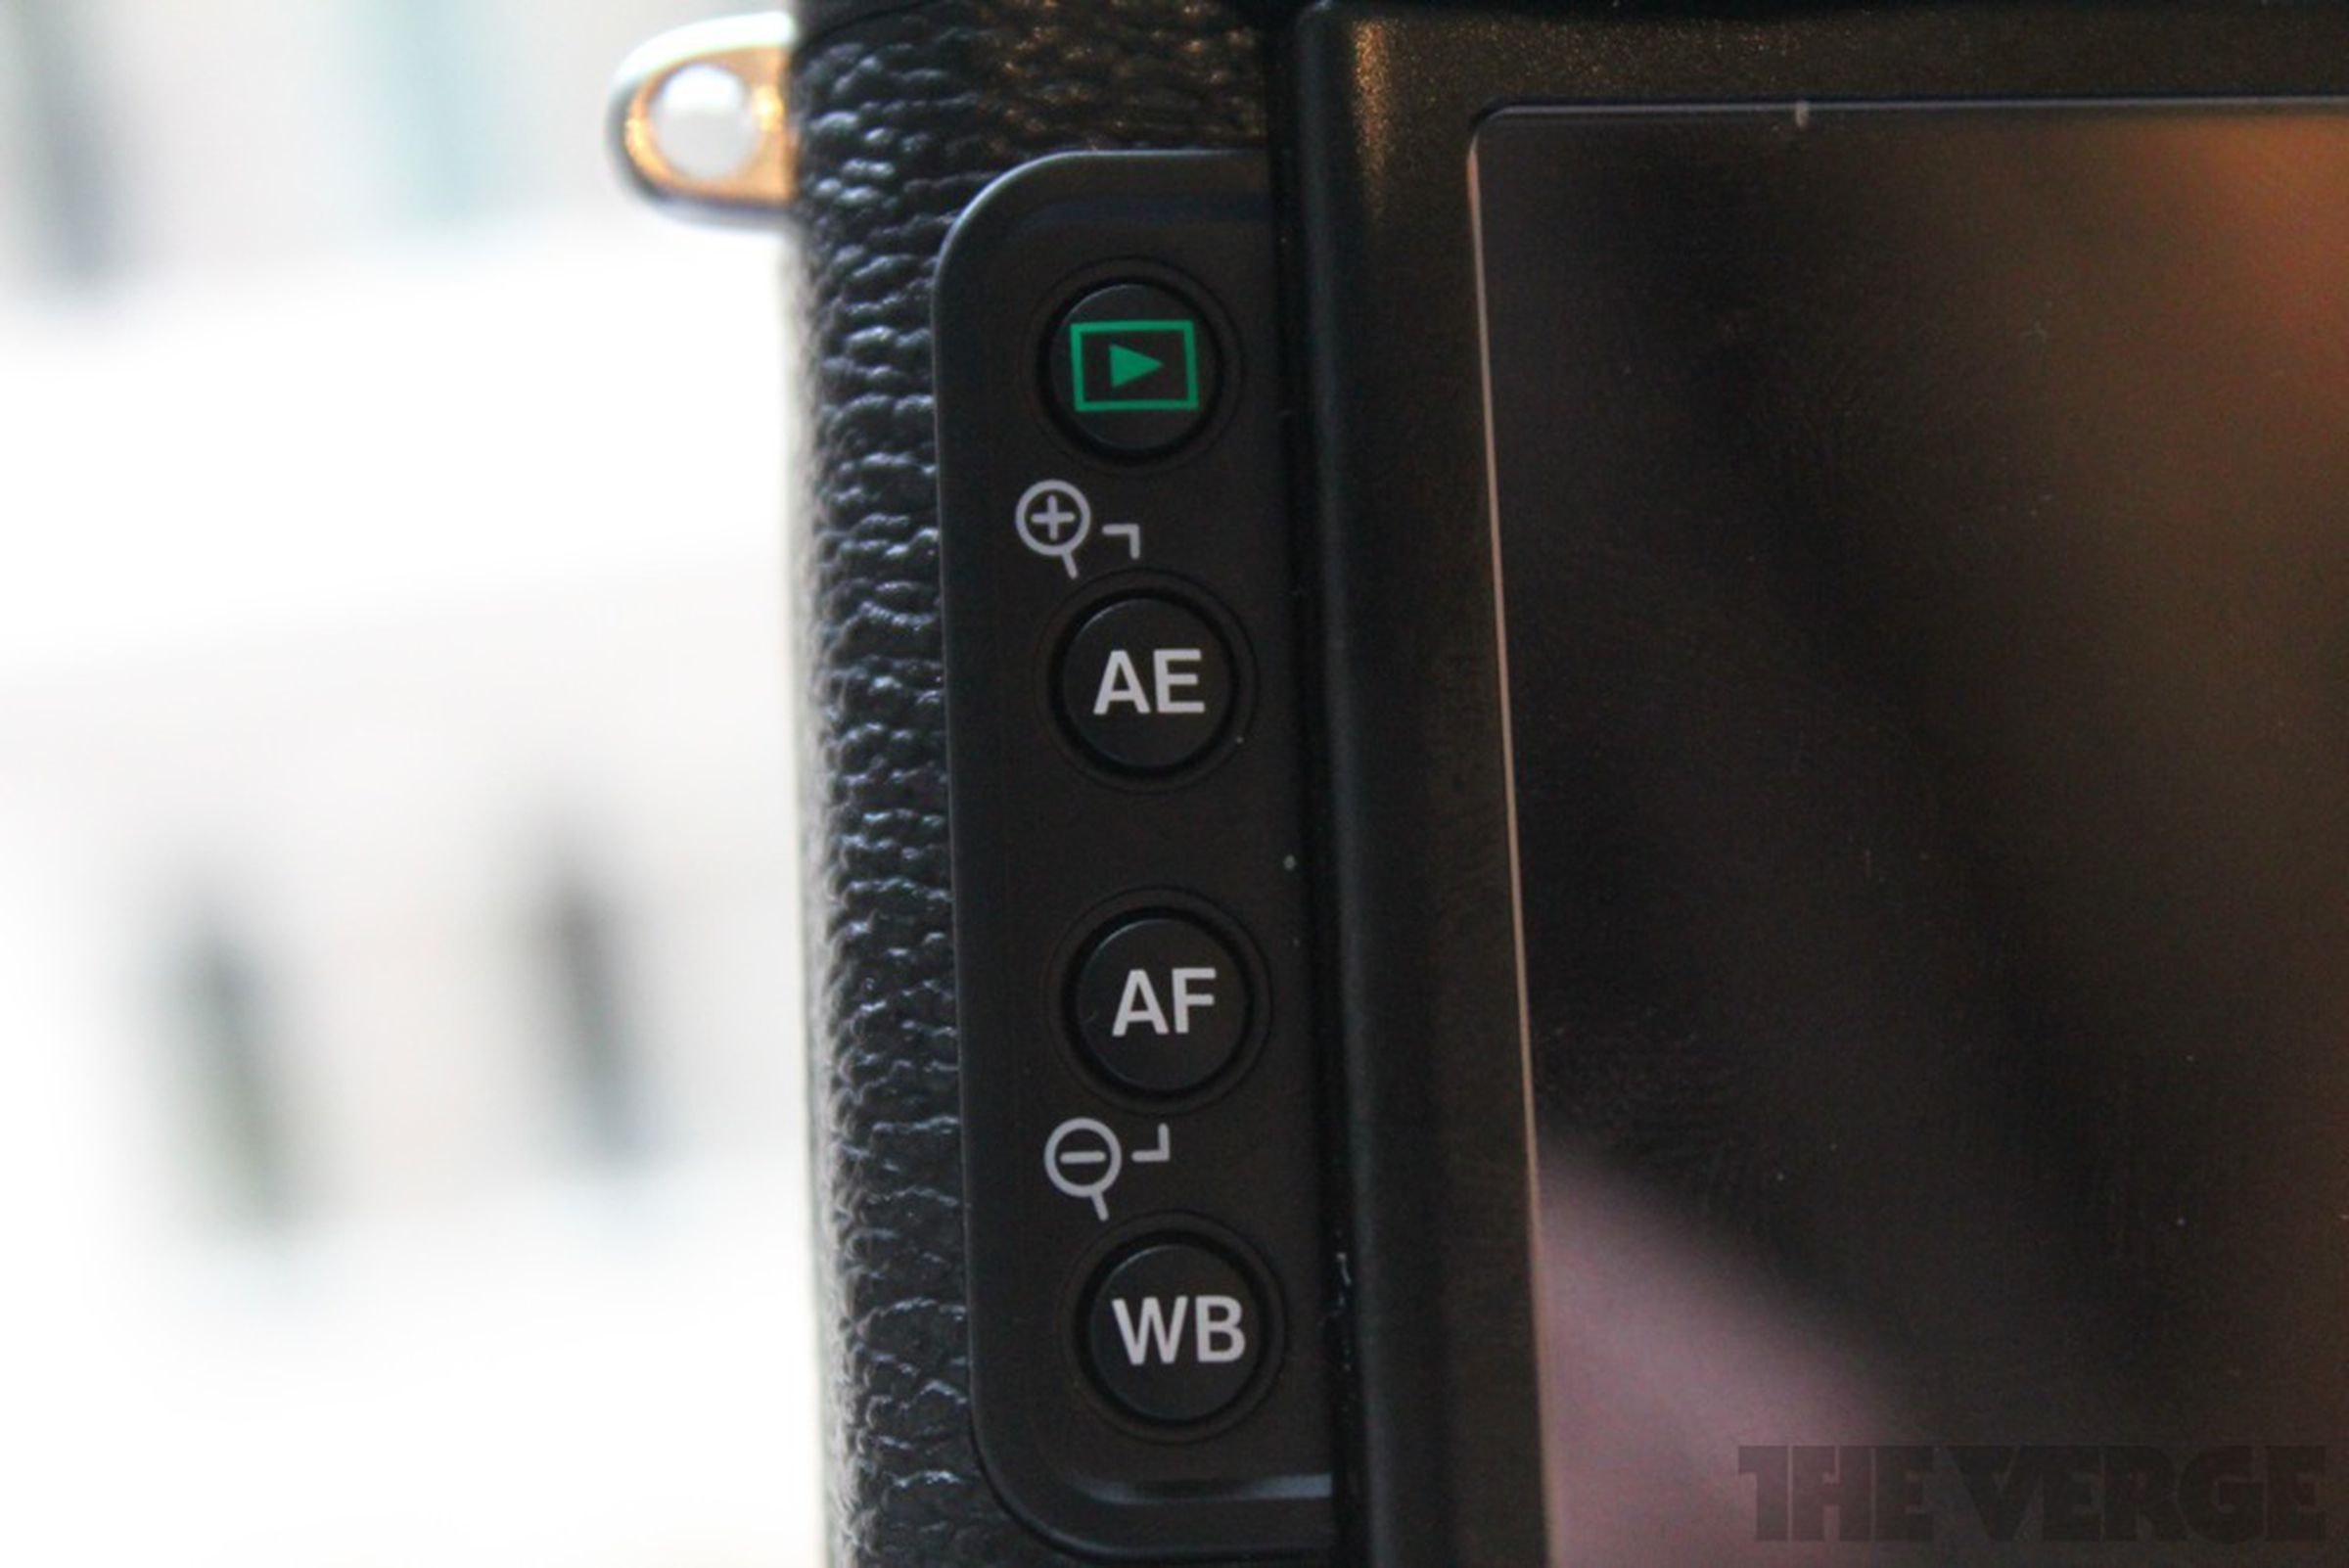 Fujifilm X10 review pictures